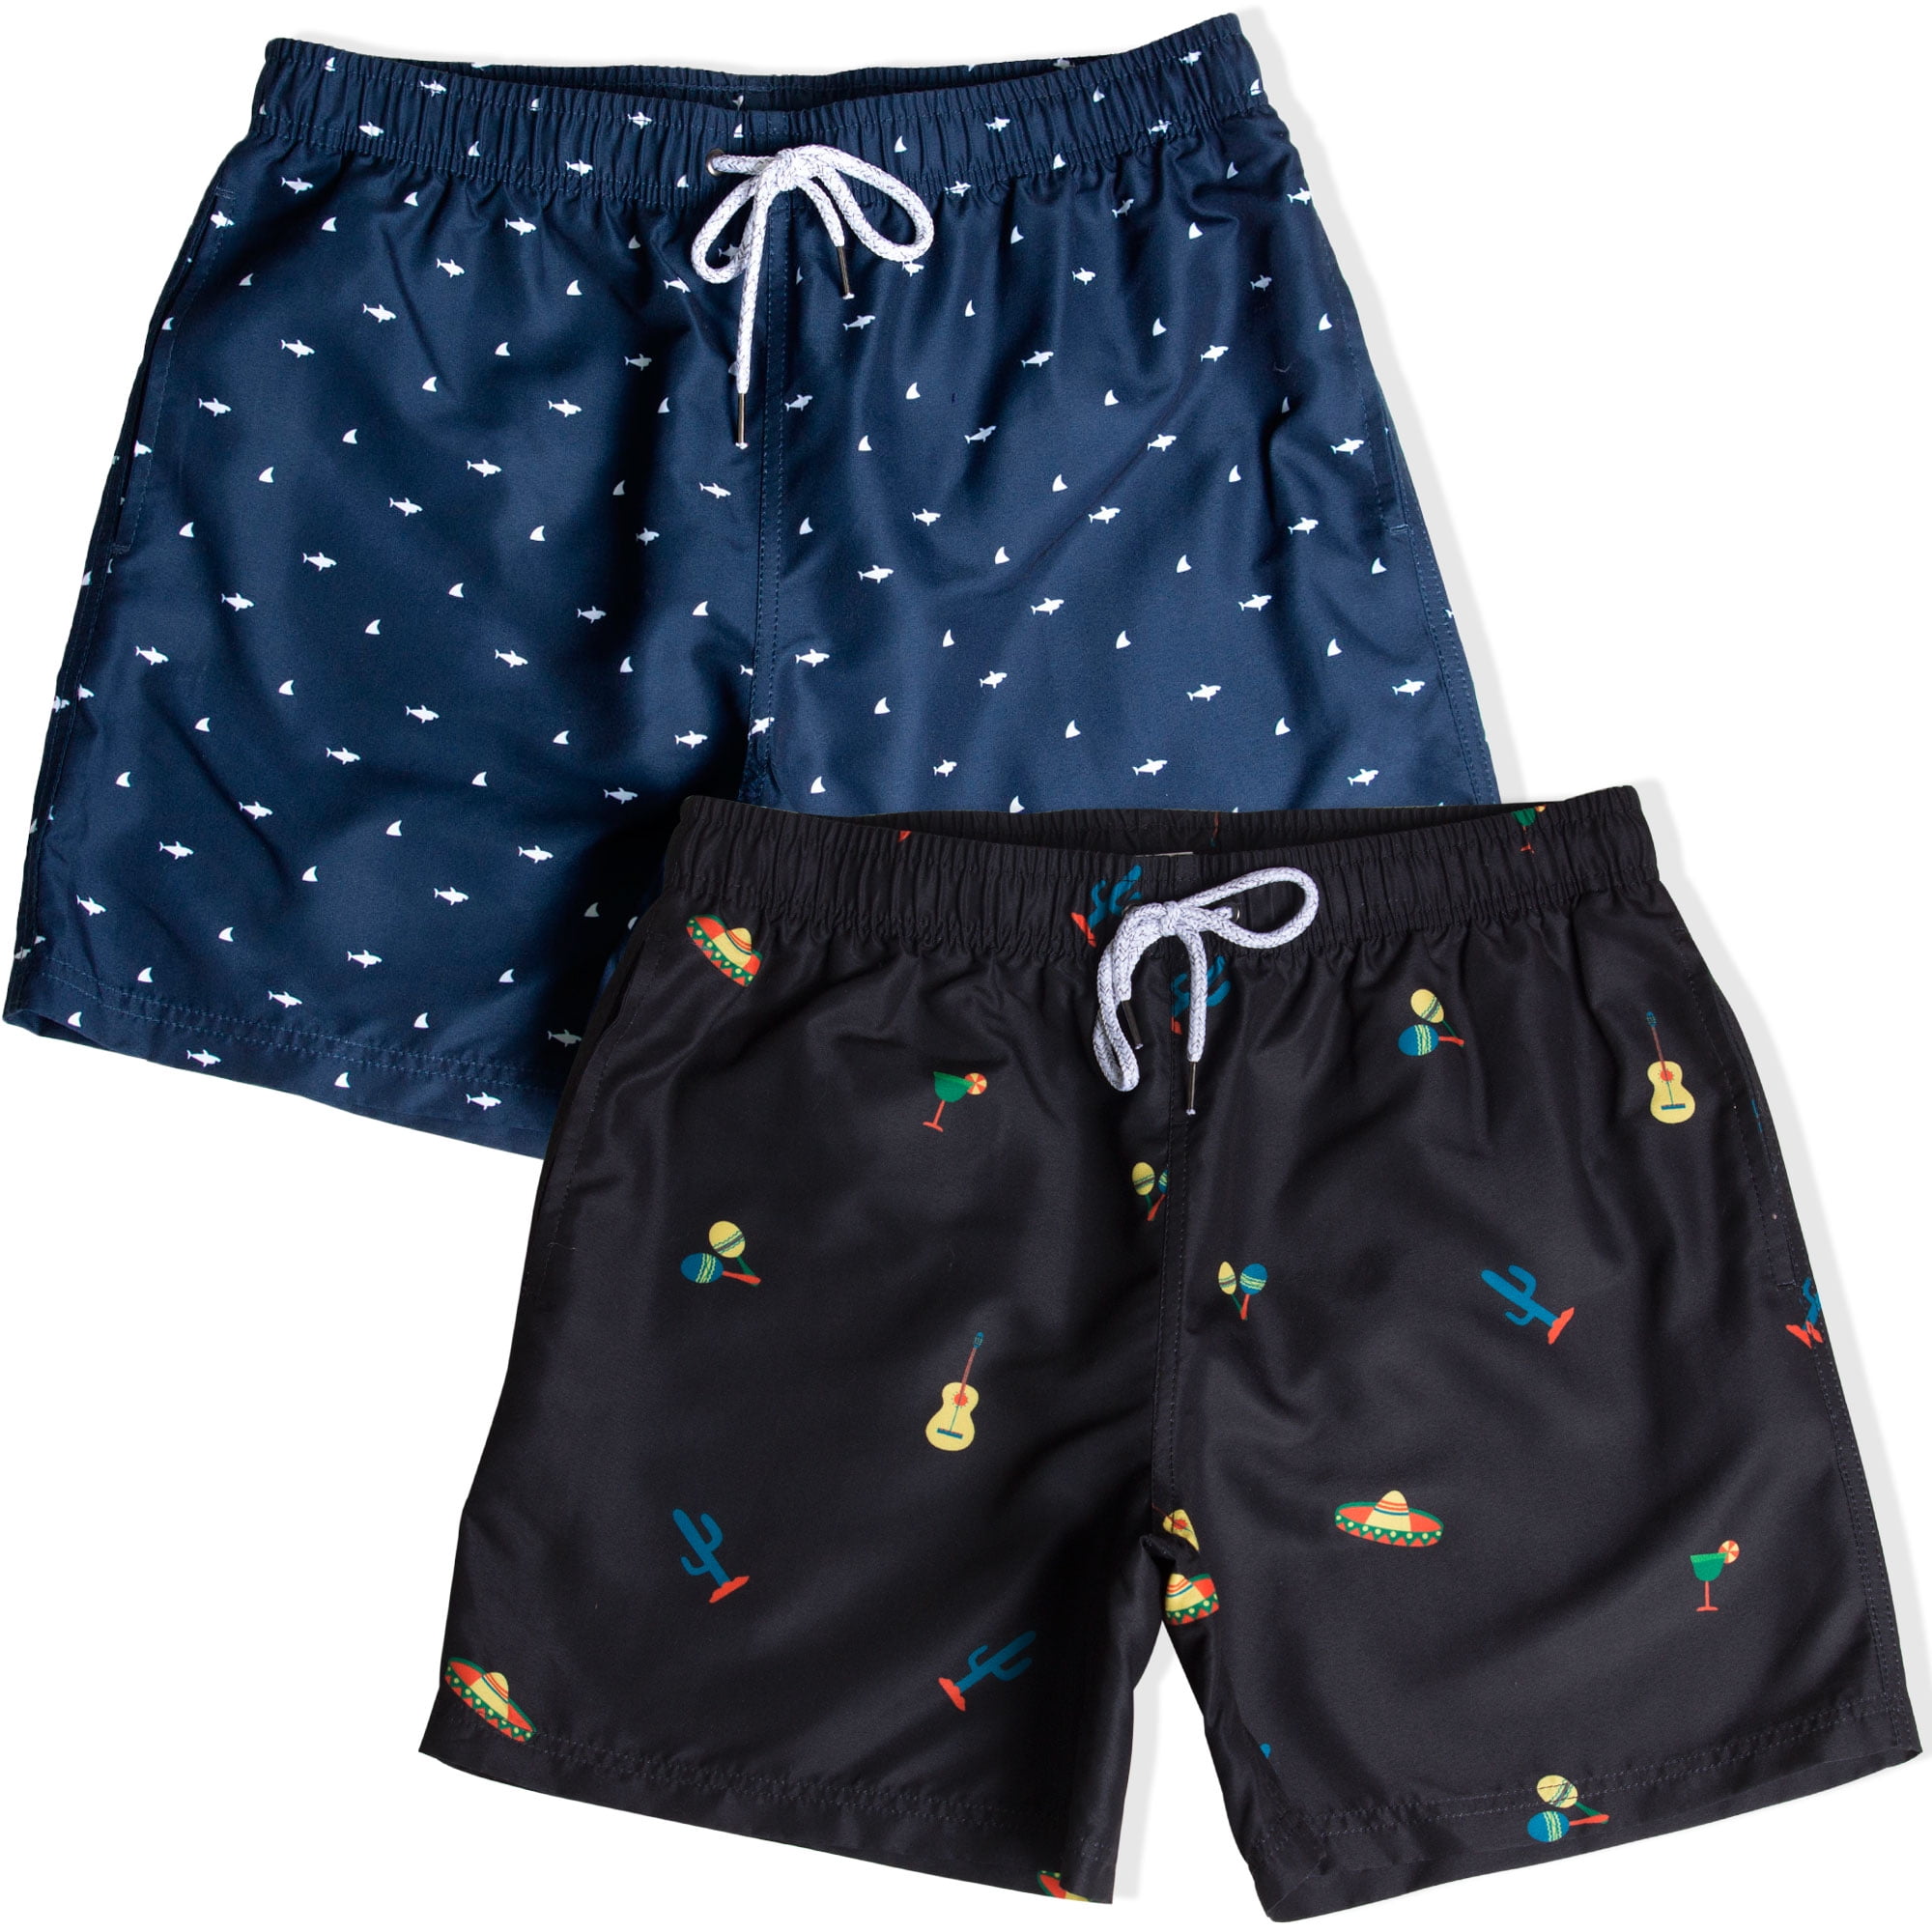 Polyester I Just Freaking Love Goats OK Swimsuit with Pockets Mens Athletic Swim Trunks